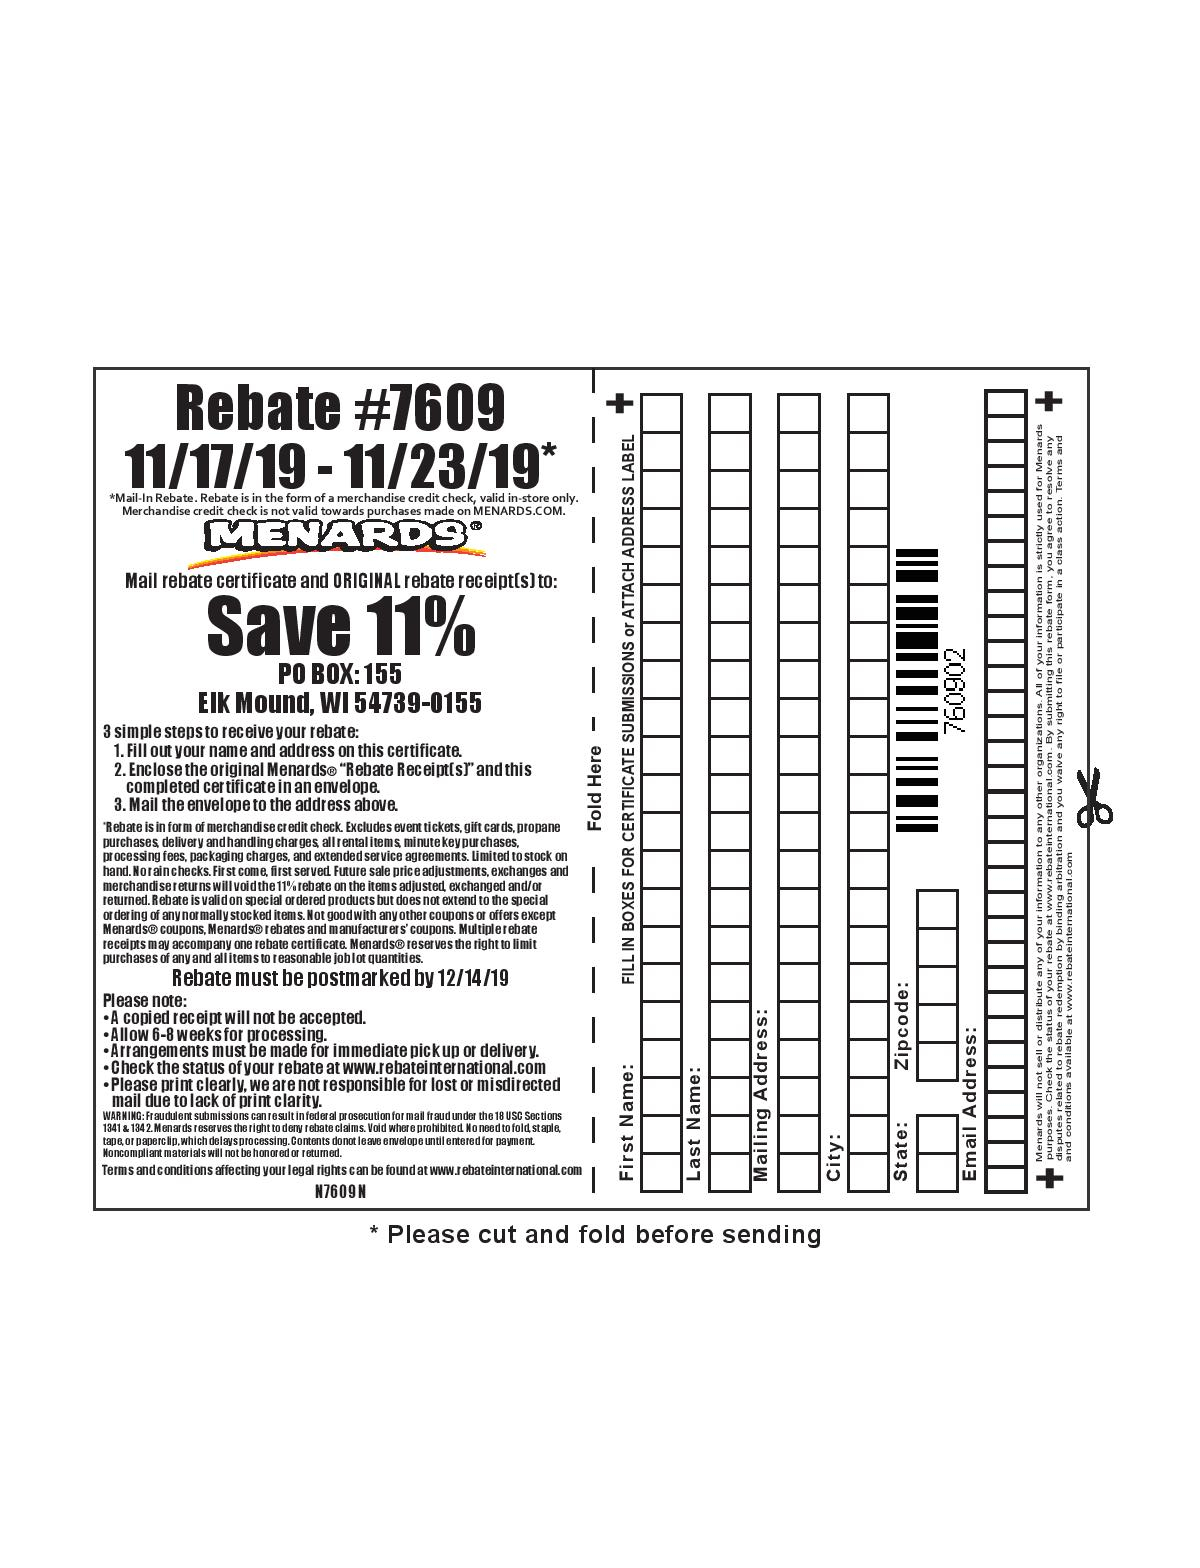 When Does The 11 Rebate Start At Menards